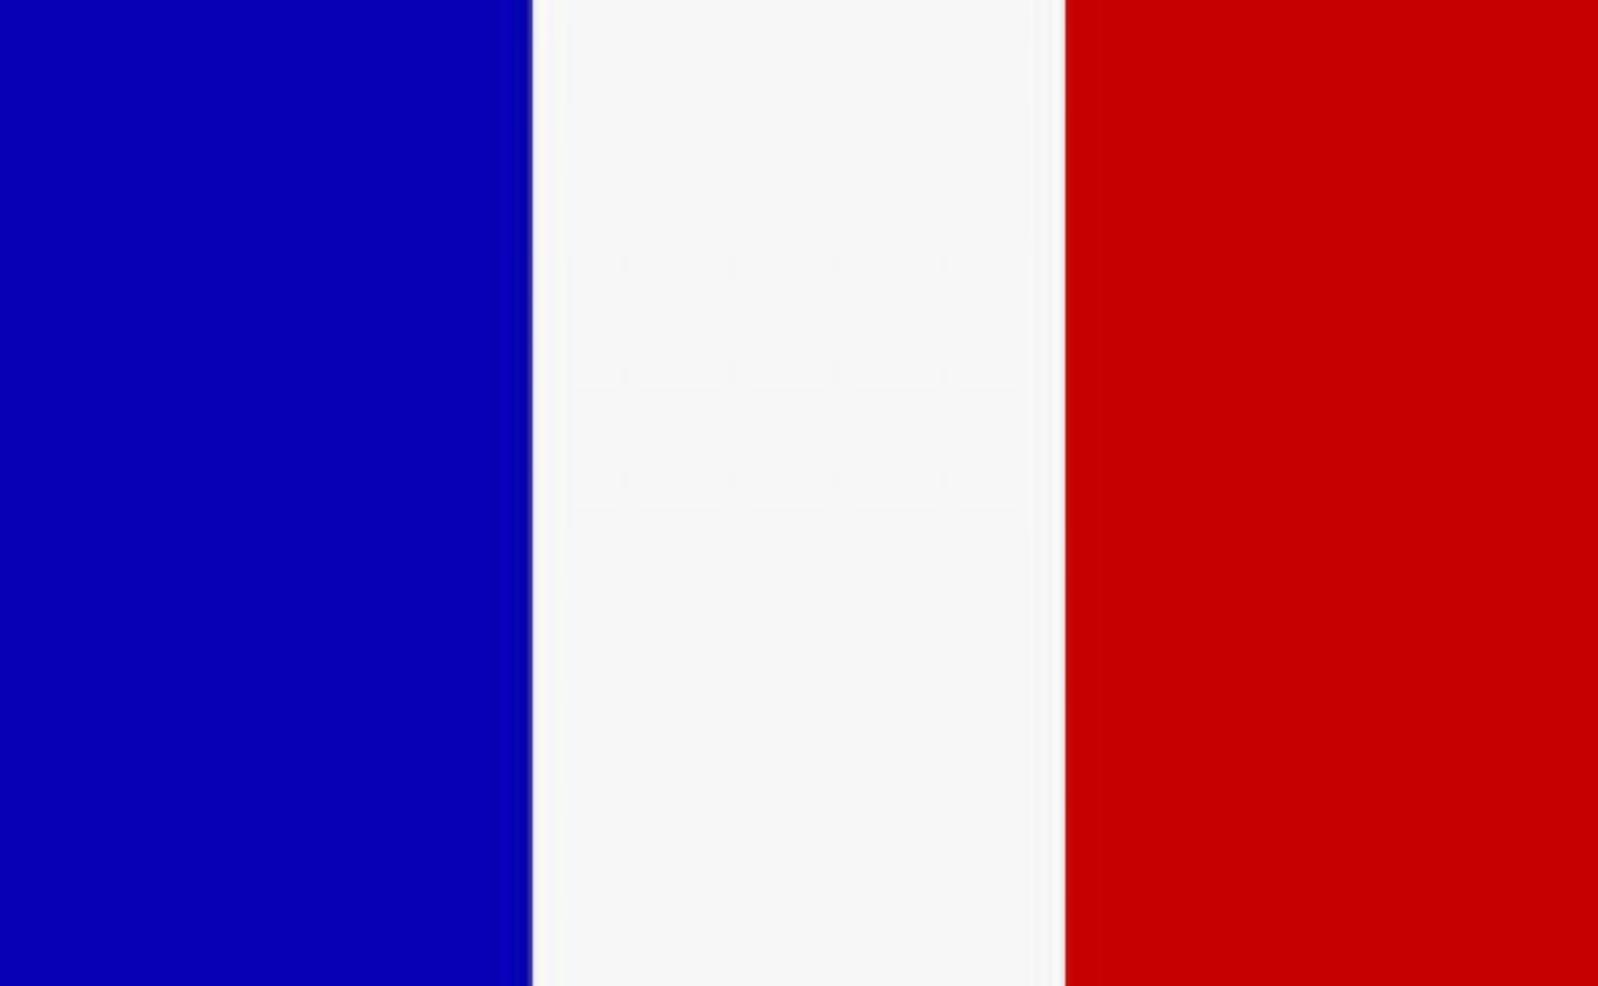 Consulate of France